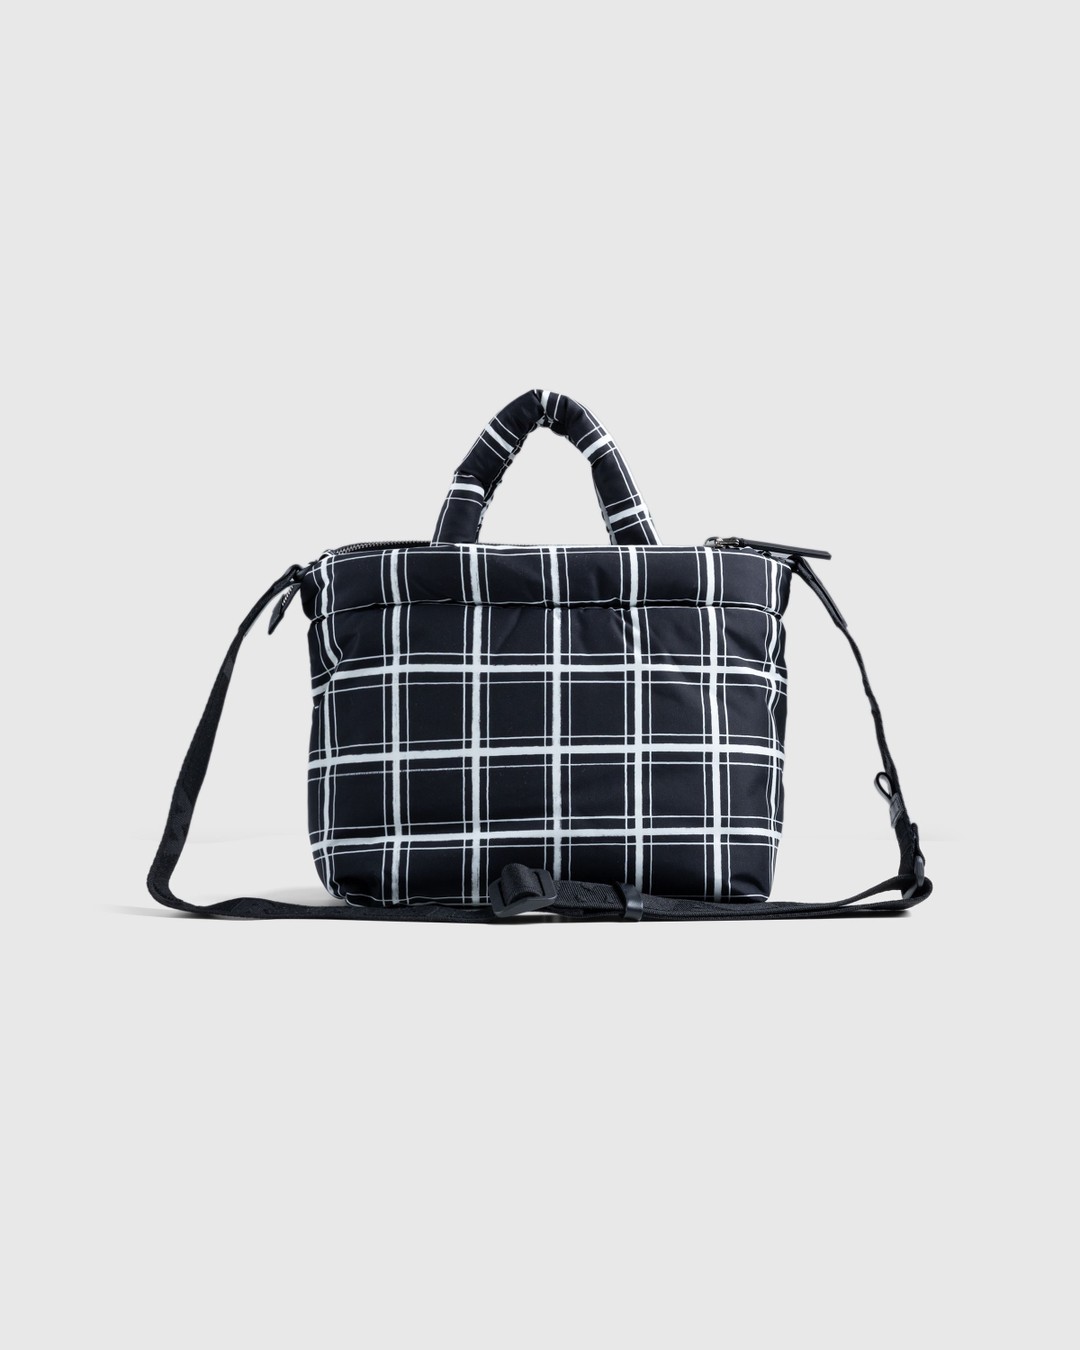 Checkered Pattern Shopper Bag, Canvas Casual Women's Tote Large Capacity  Shoulder Bag Fashion Black and White Checkerboard Handbag For Female